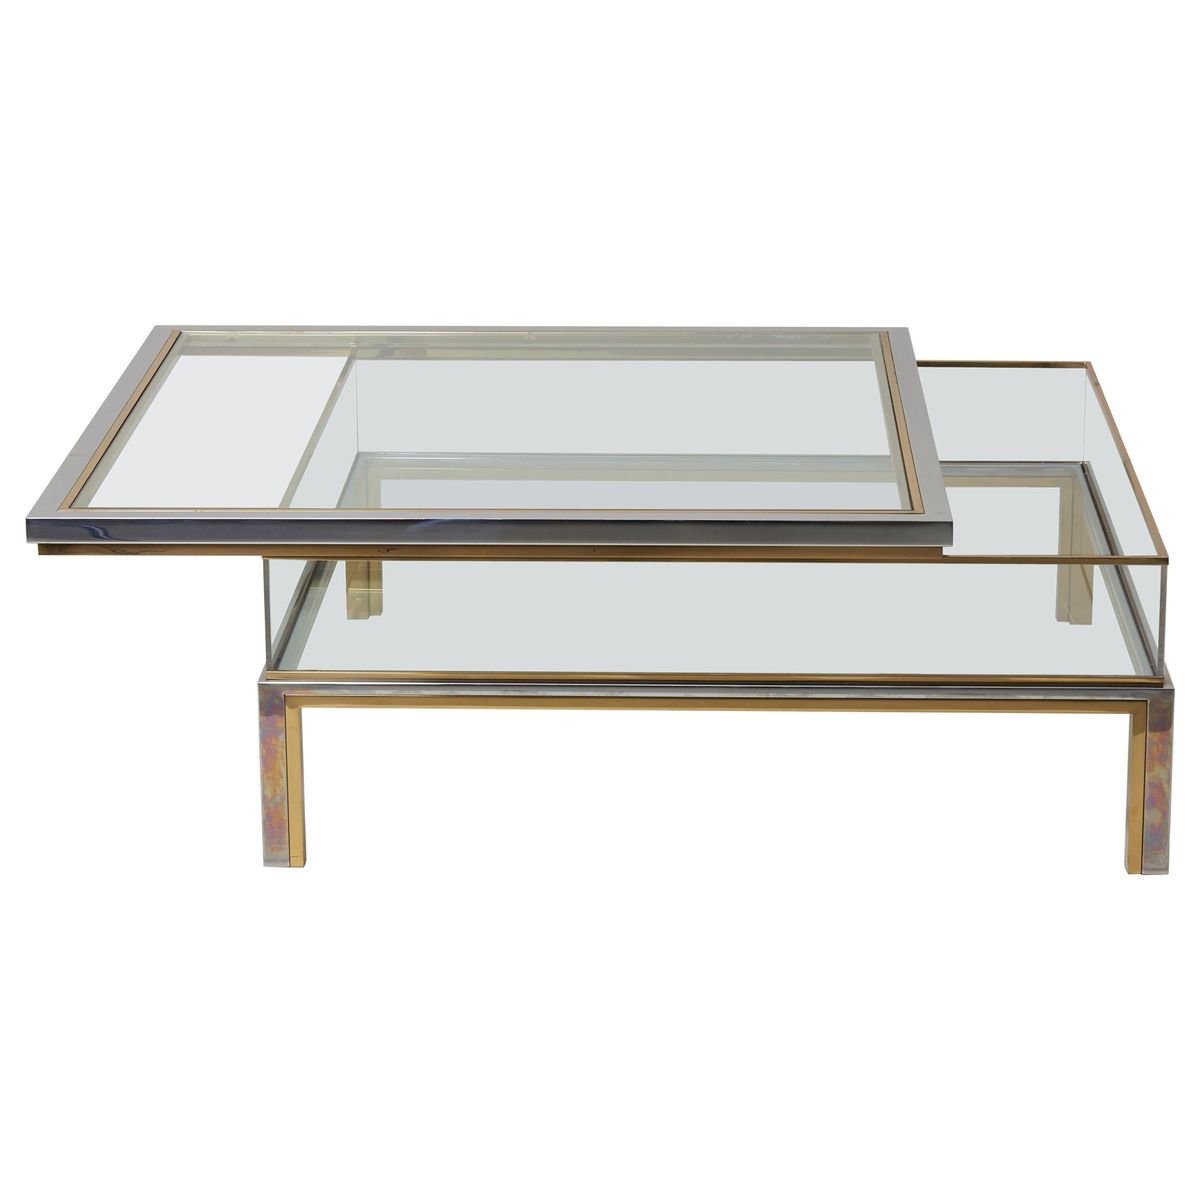 Sliding Top Coffee Table In Brass And Chrome From Maison Jansen